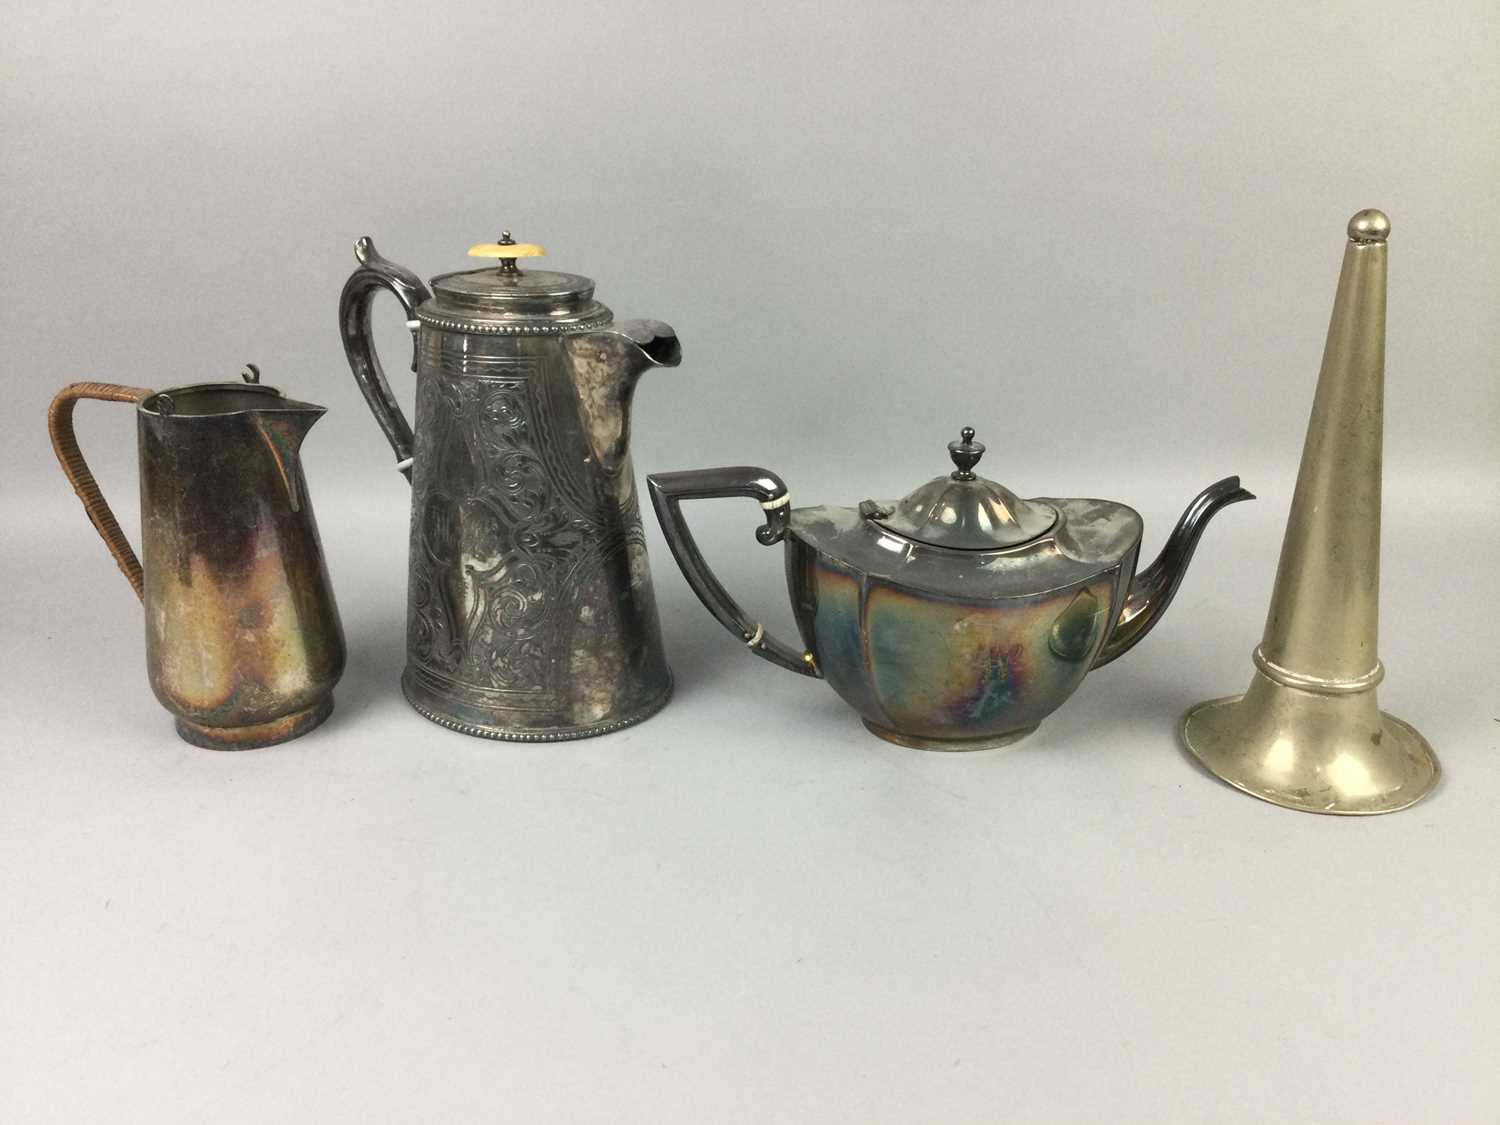 Lot 27 - A VICTORIAN SILVER PLATED HOT WATER POT AND OTHER SILVER PLATED ITEMS